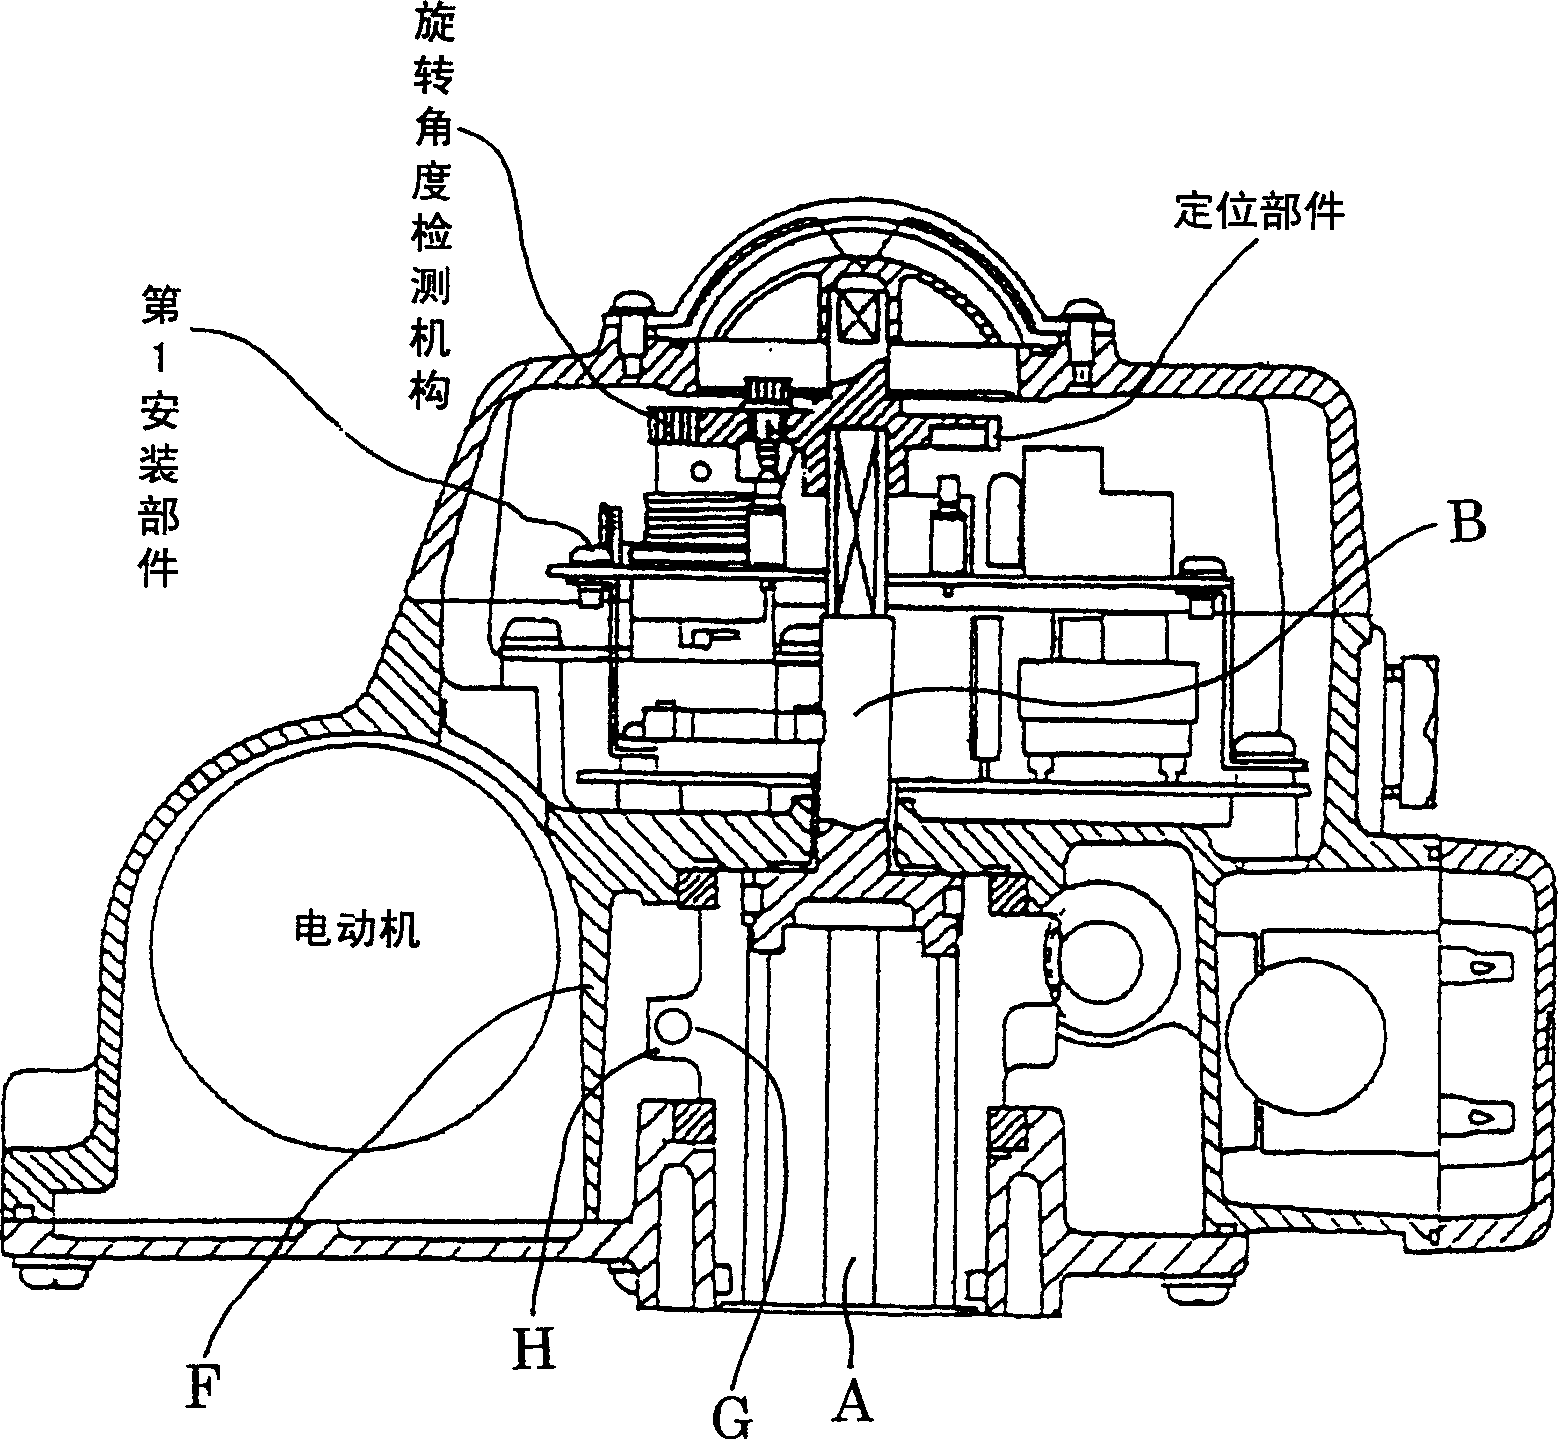 Rotary angle limiting mechanism of rotary valve and regulator therewith